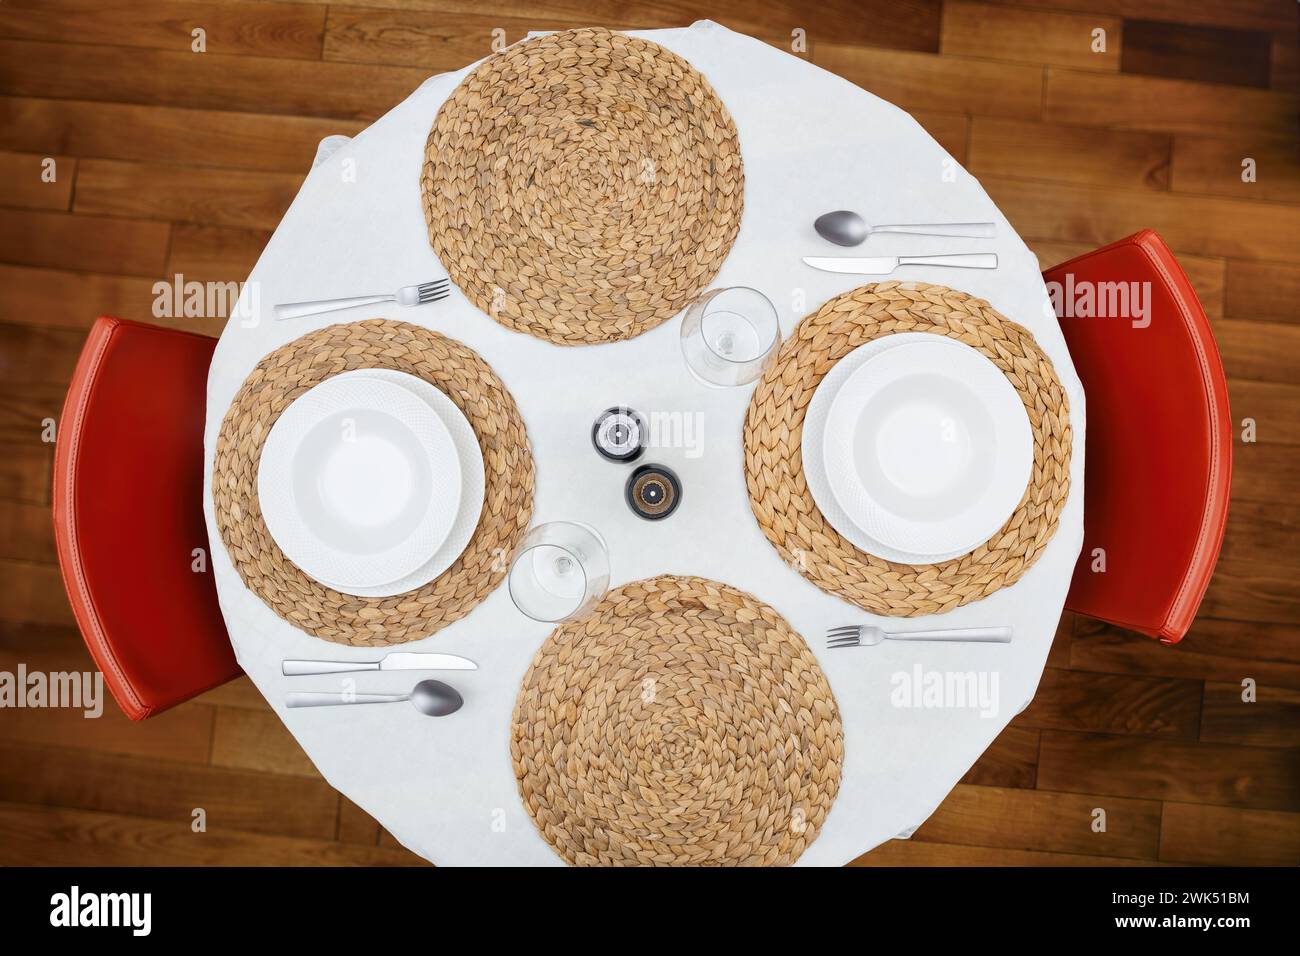 Top view of a round dining table set with white plates, silverware, woven placemats, and red chairs, ready for a meal. Stock Photo